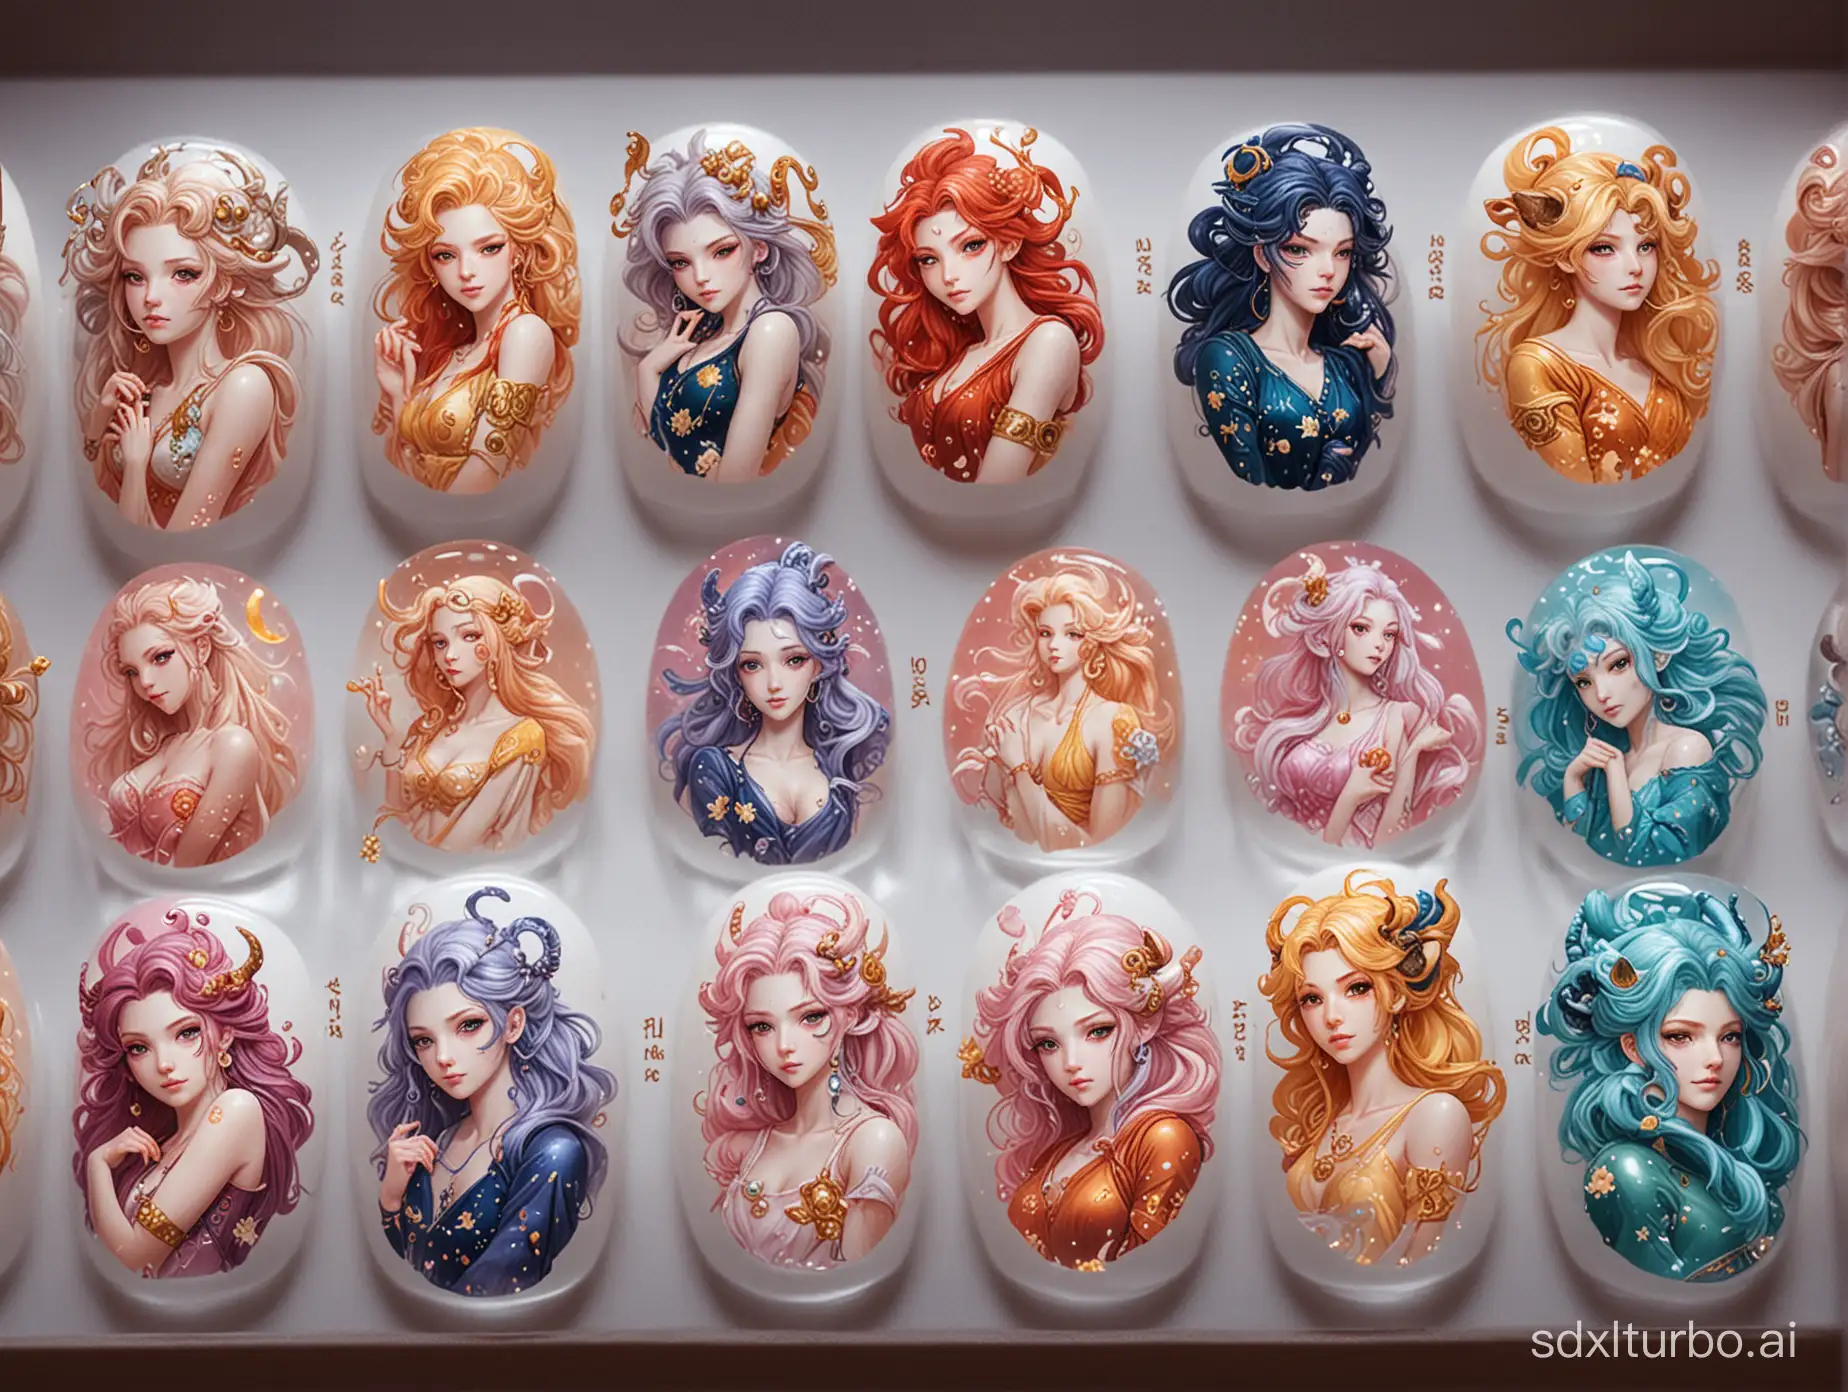 Nail art depicting the twelve zodiac signs in a modern, lifelike, anime-style, visually stunning manner.